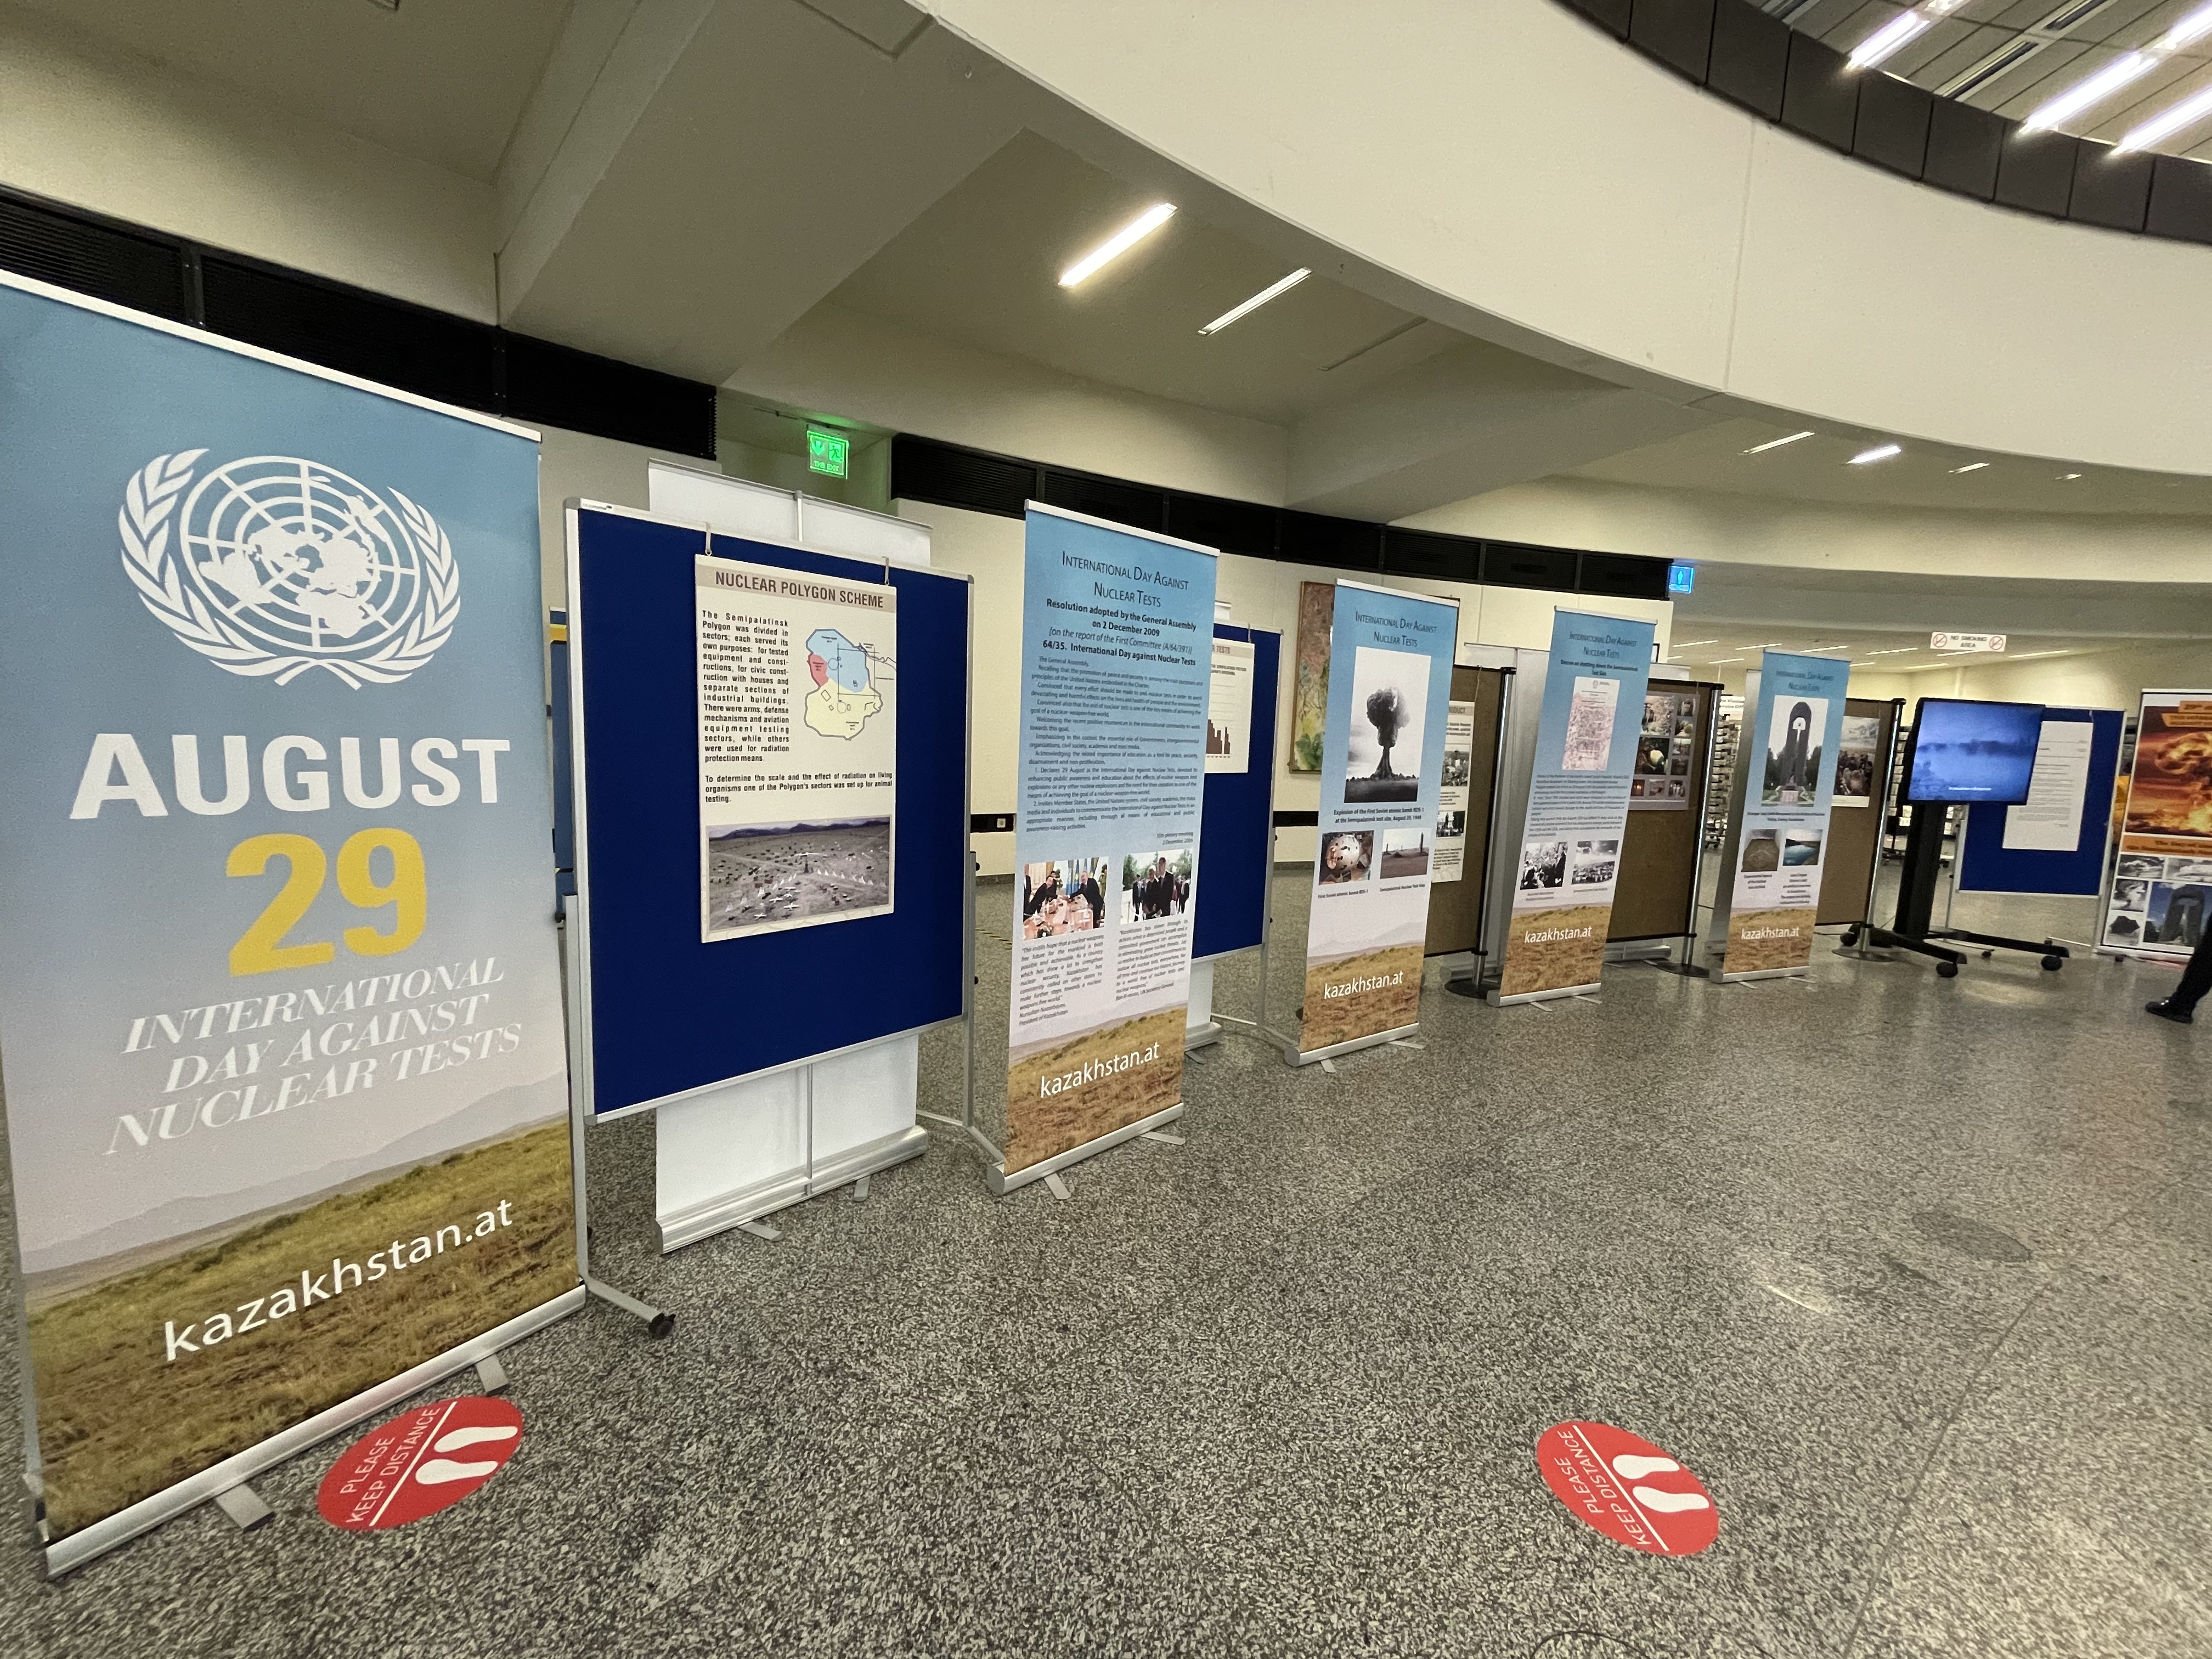 UN Office in Vienna Hosts Exhibition Dedicated to 30th Anniversary of Closing Semipalatinsk Nuclear Test Site